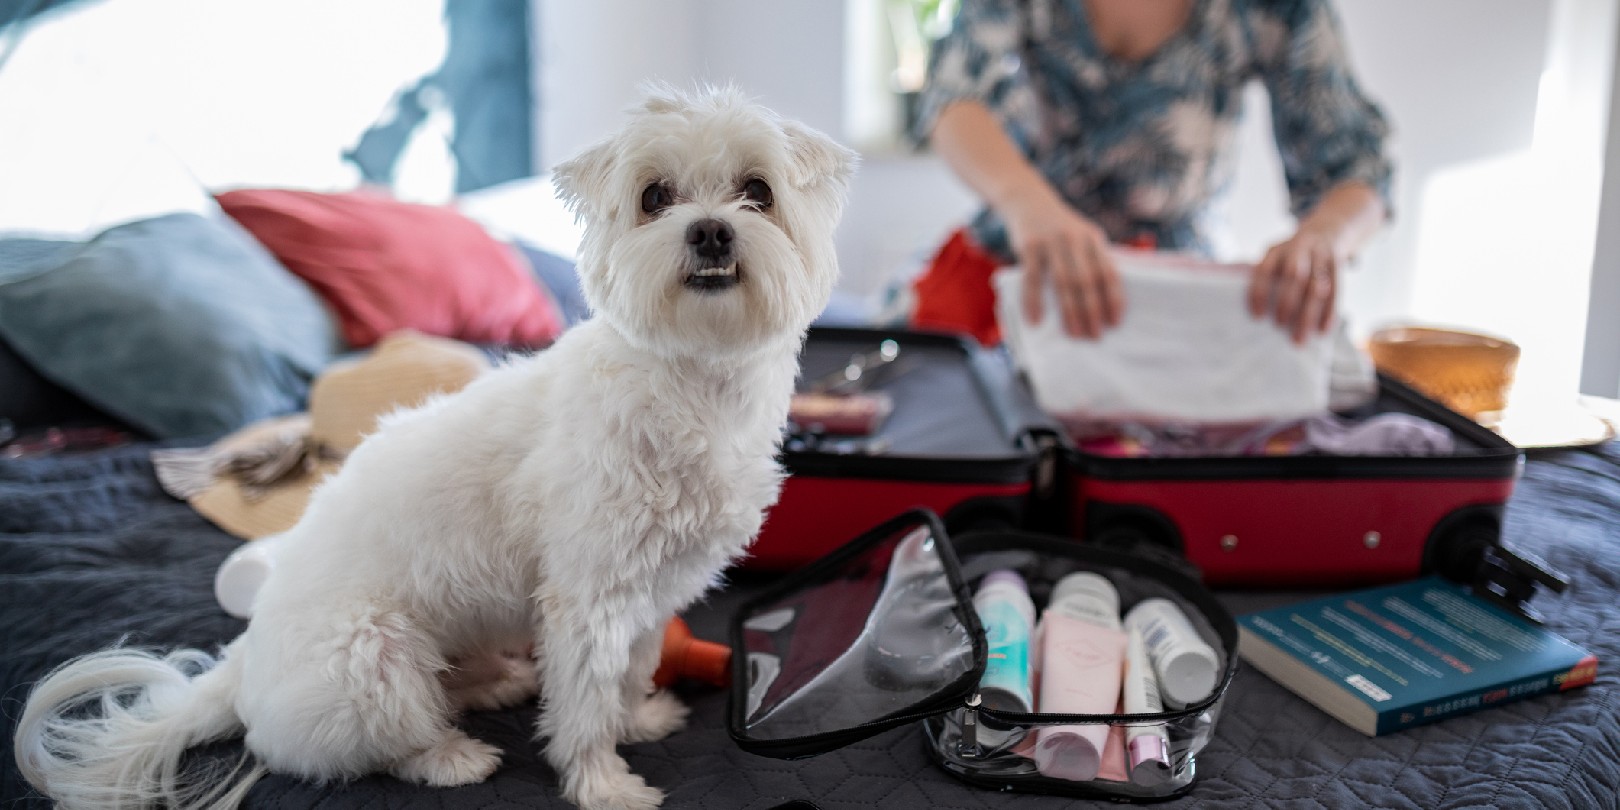 Dog making company to his owner while she's packing suitcase